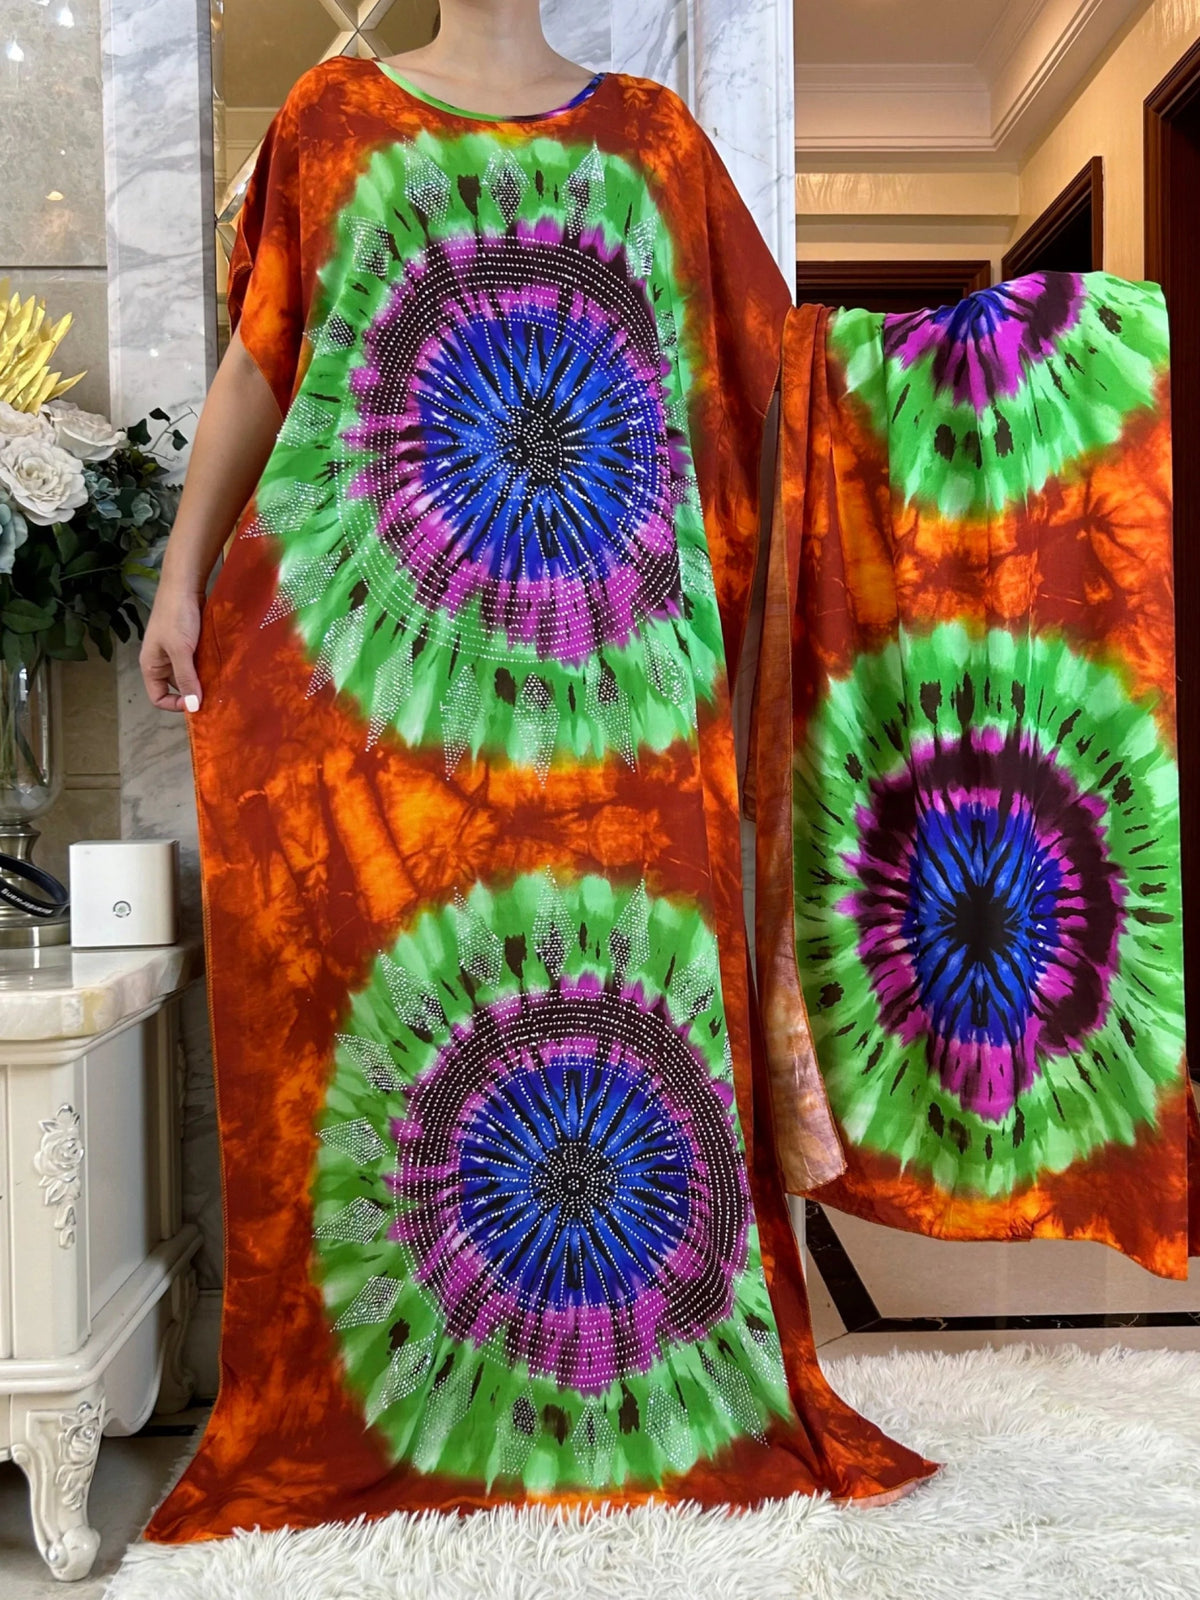 African Summer Abaya Dress: Short Sleeve Dashiki Design with Oversized Floral Scarf - Flexi Africa - Flexi Africa offers Free Delivery Worldwide - Vibrant African traditional clothing showcasing bold prints and intricate designs